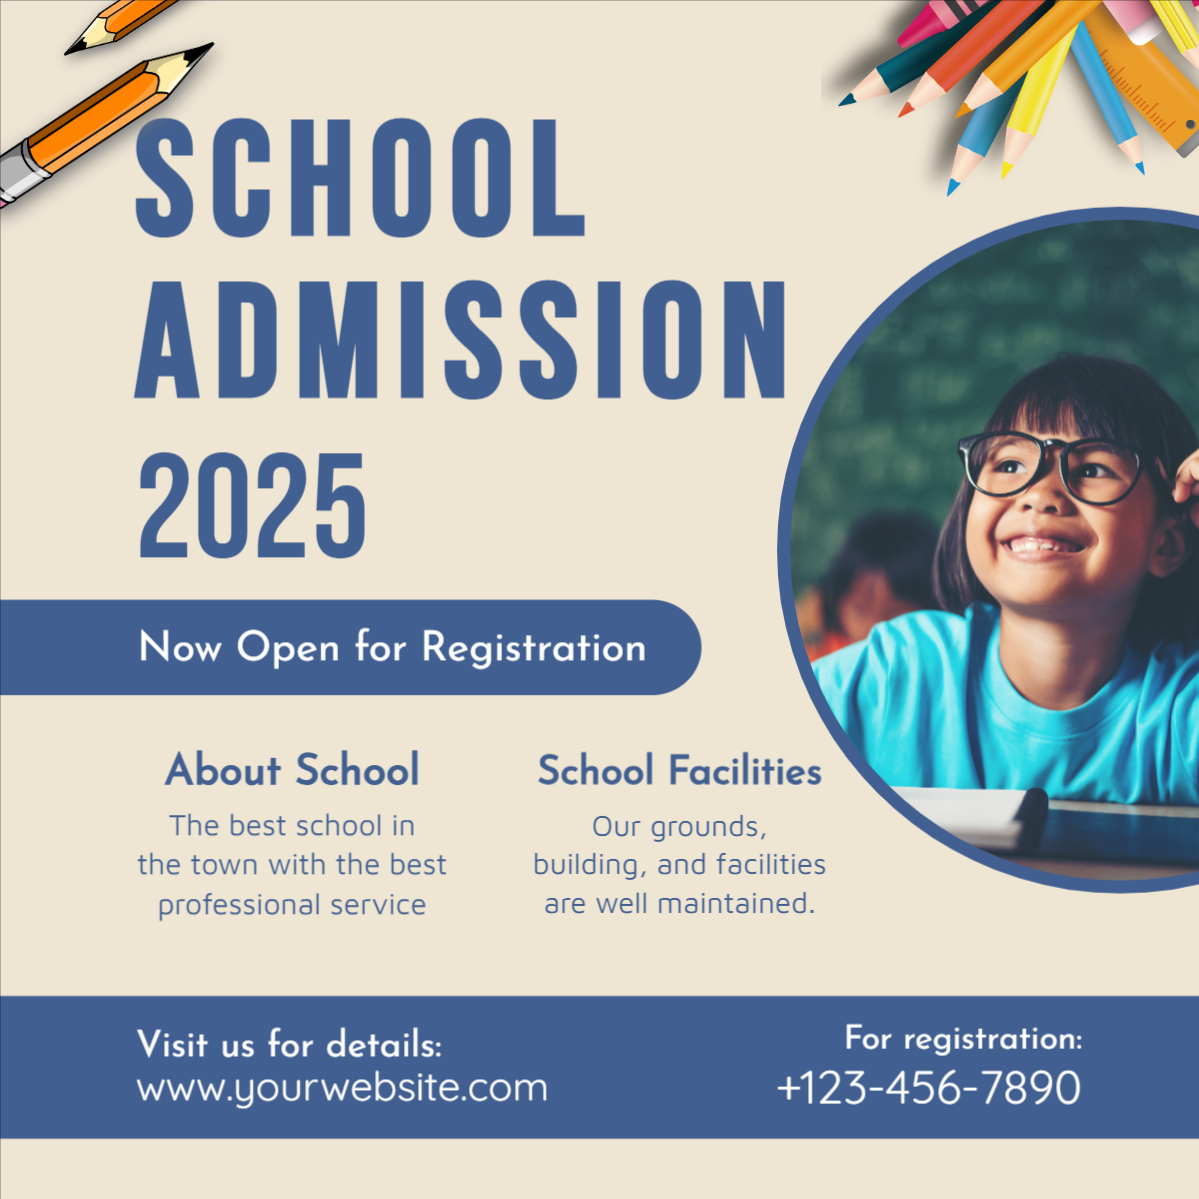 School Admission open poster design download for free